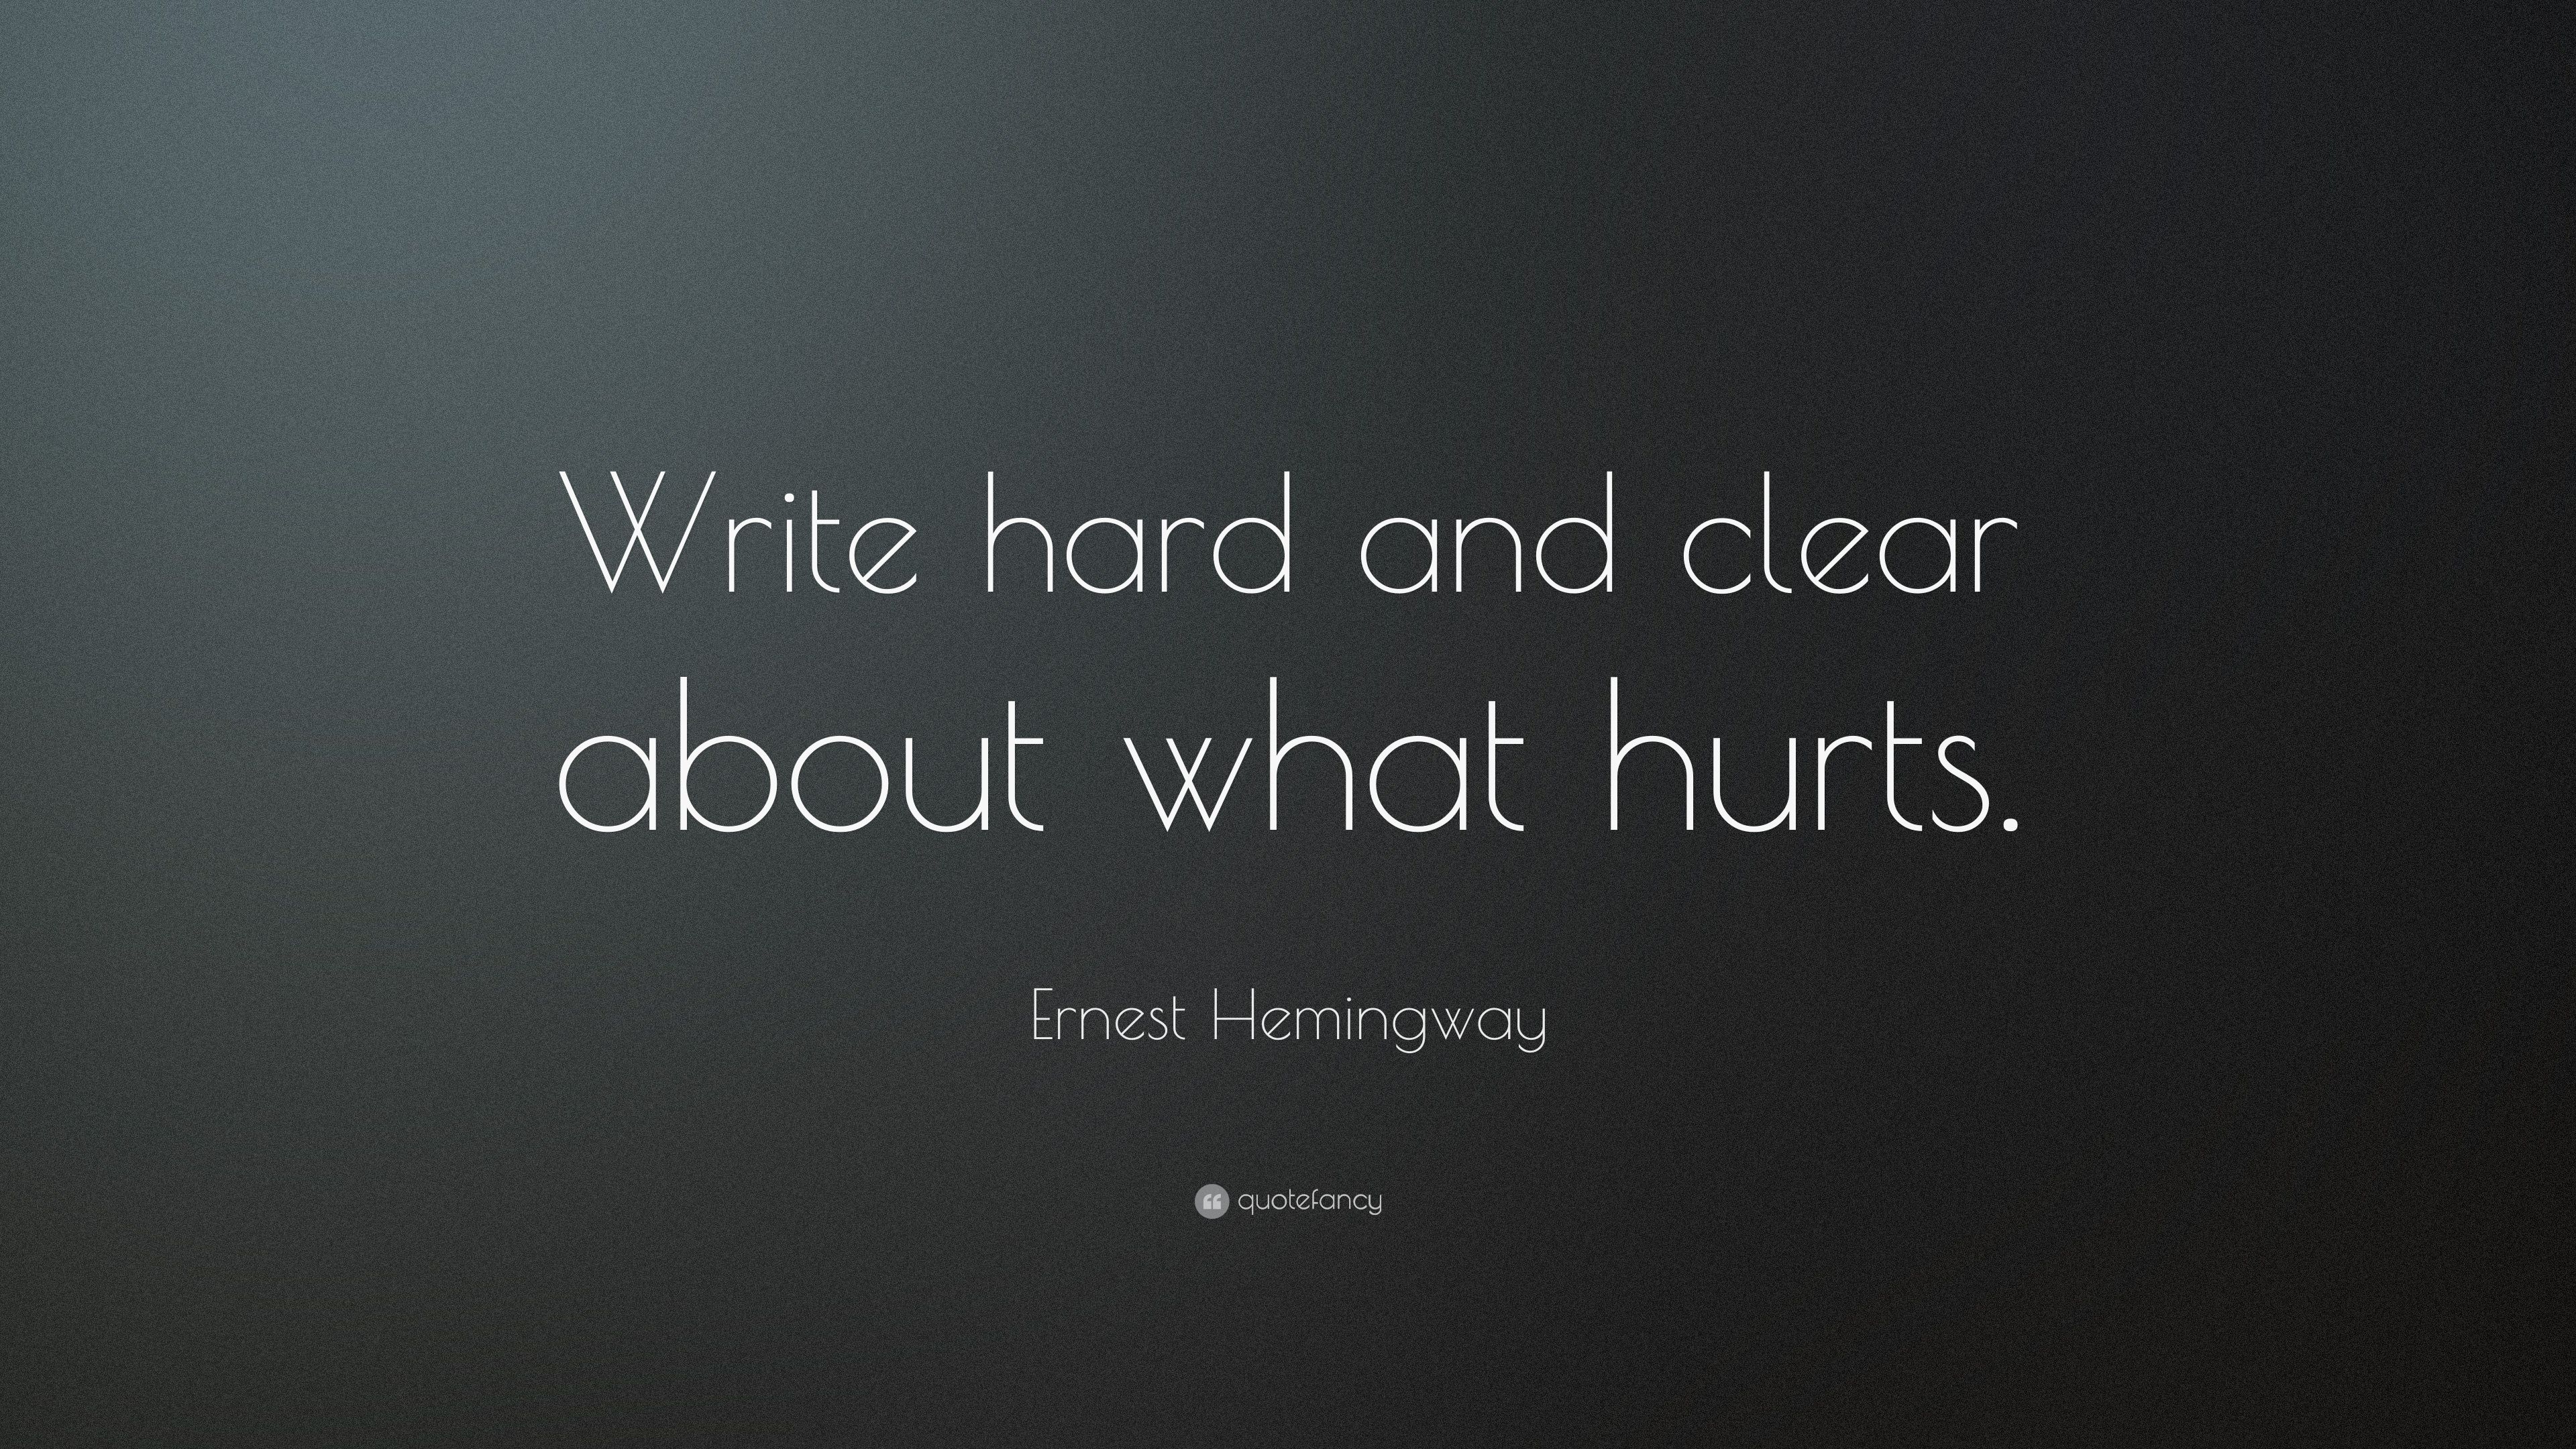 Ernest Hemingway Quote: “Write hard and clear about what hurts